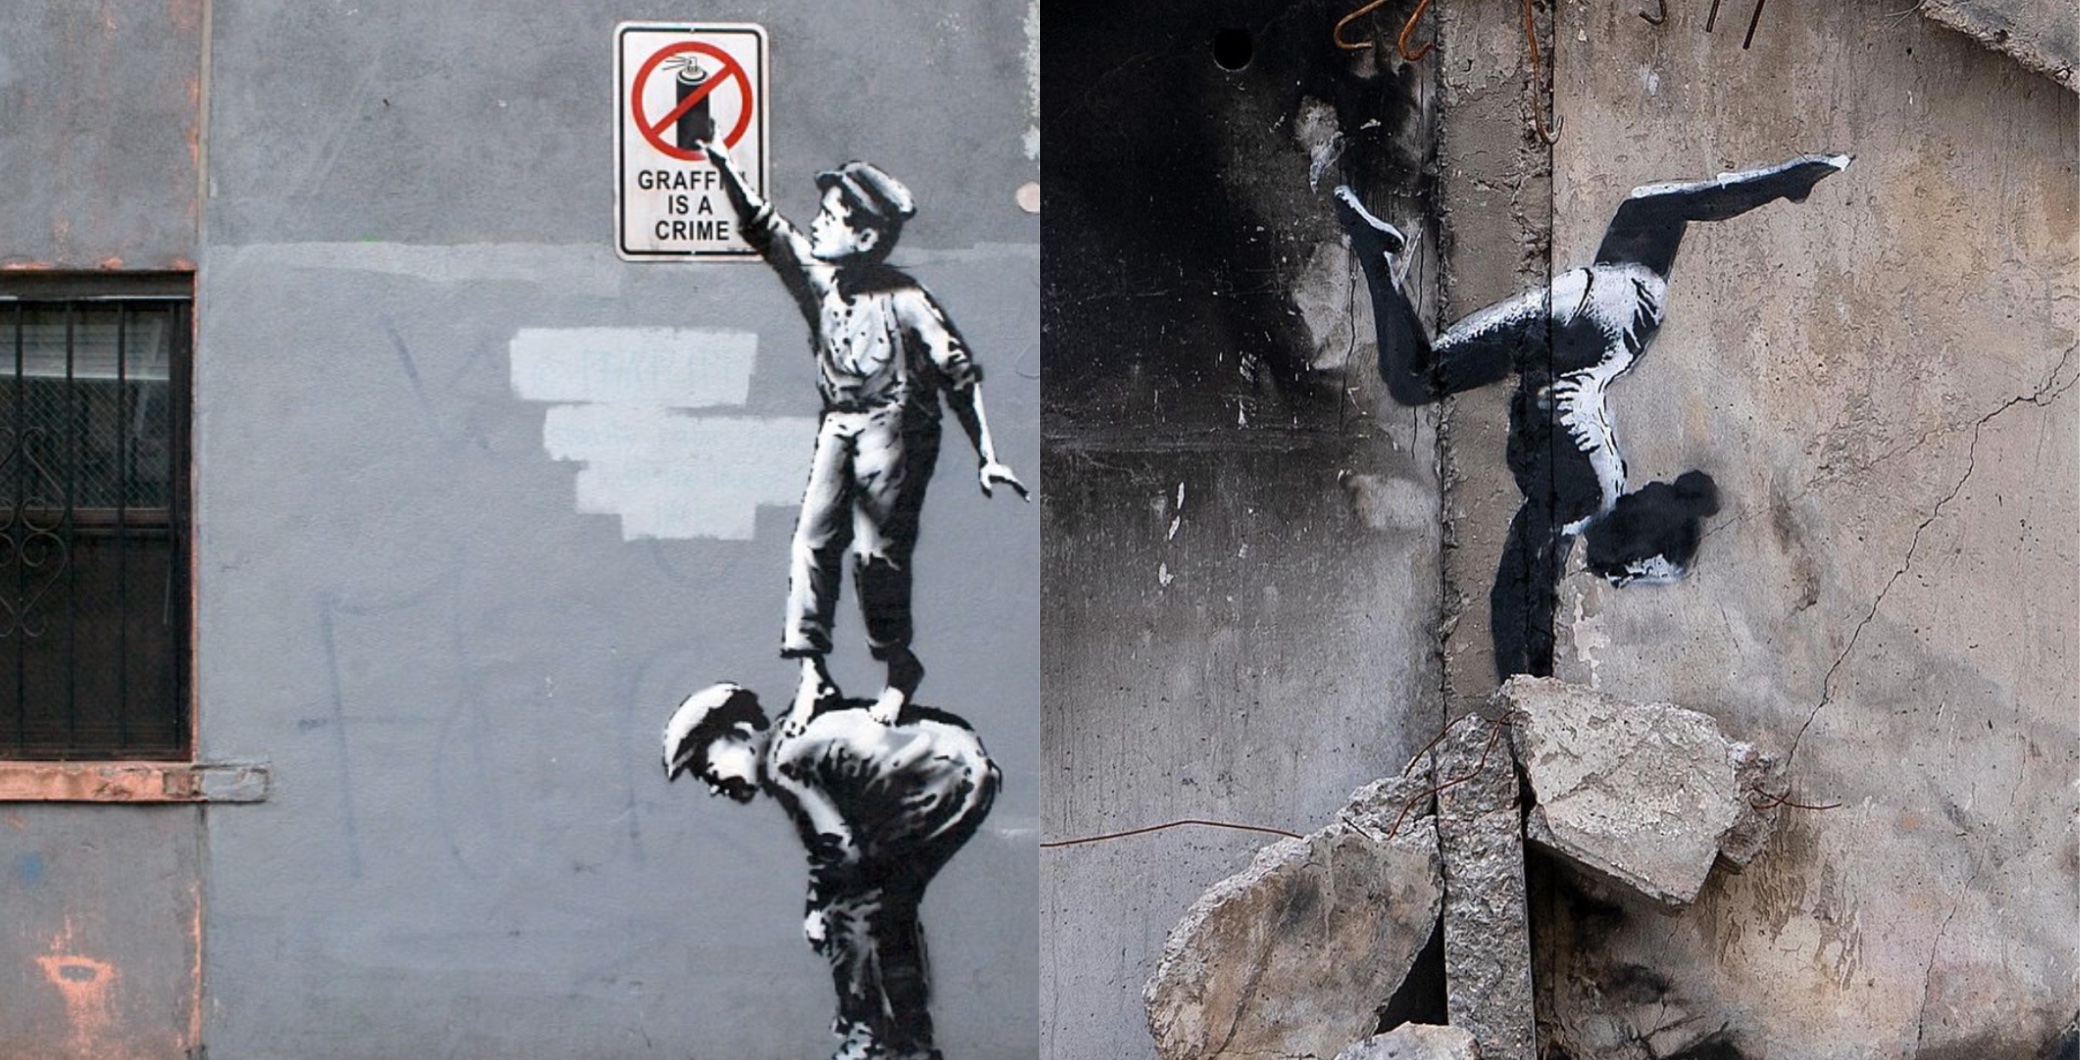 A travelling Banksy art exhibit is coming to Toronto this summer